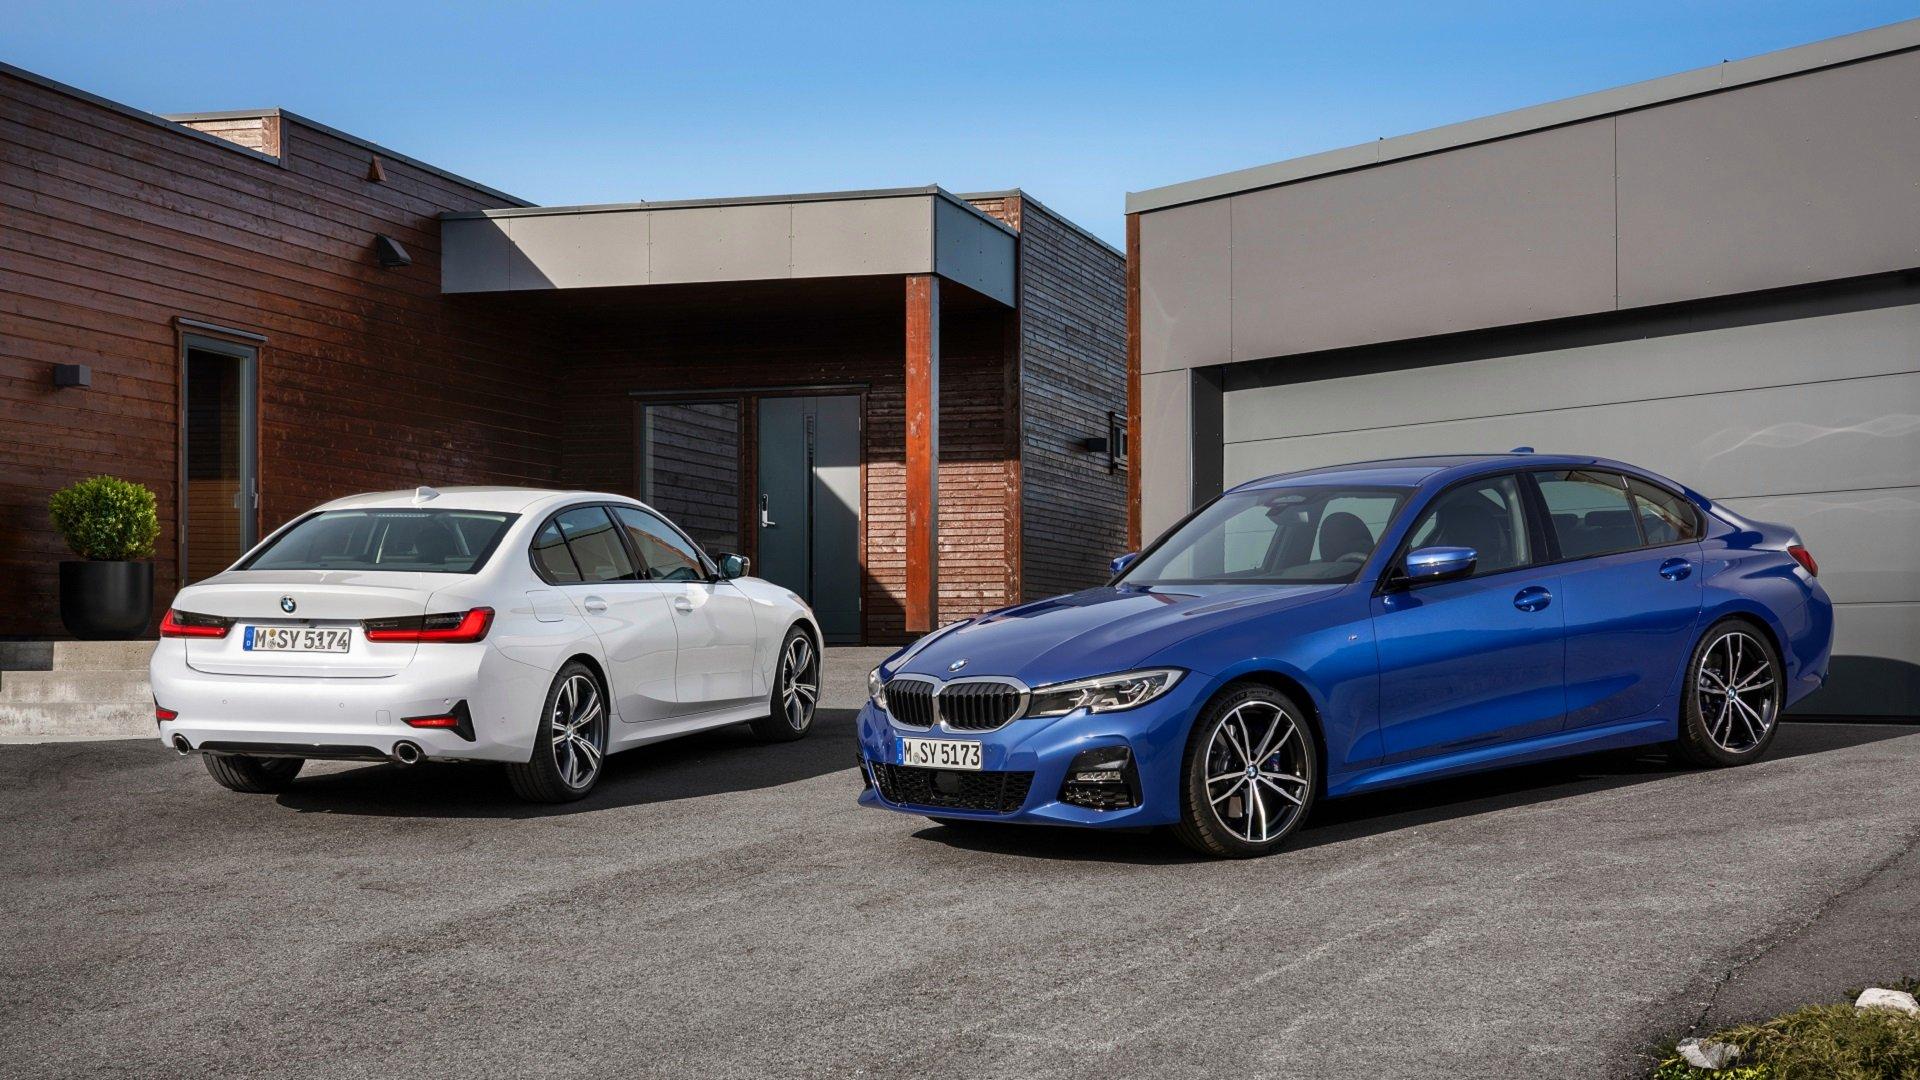 BMW 3 Series: All New and Ready to Impress